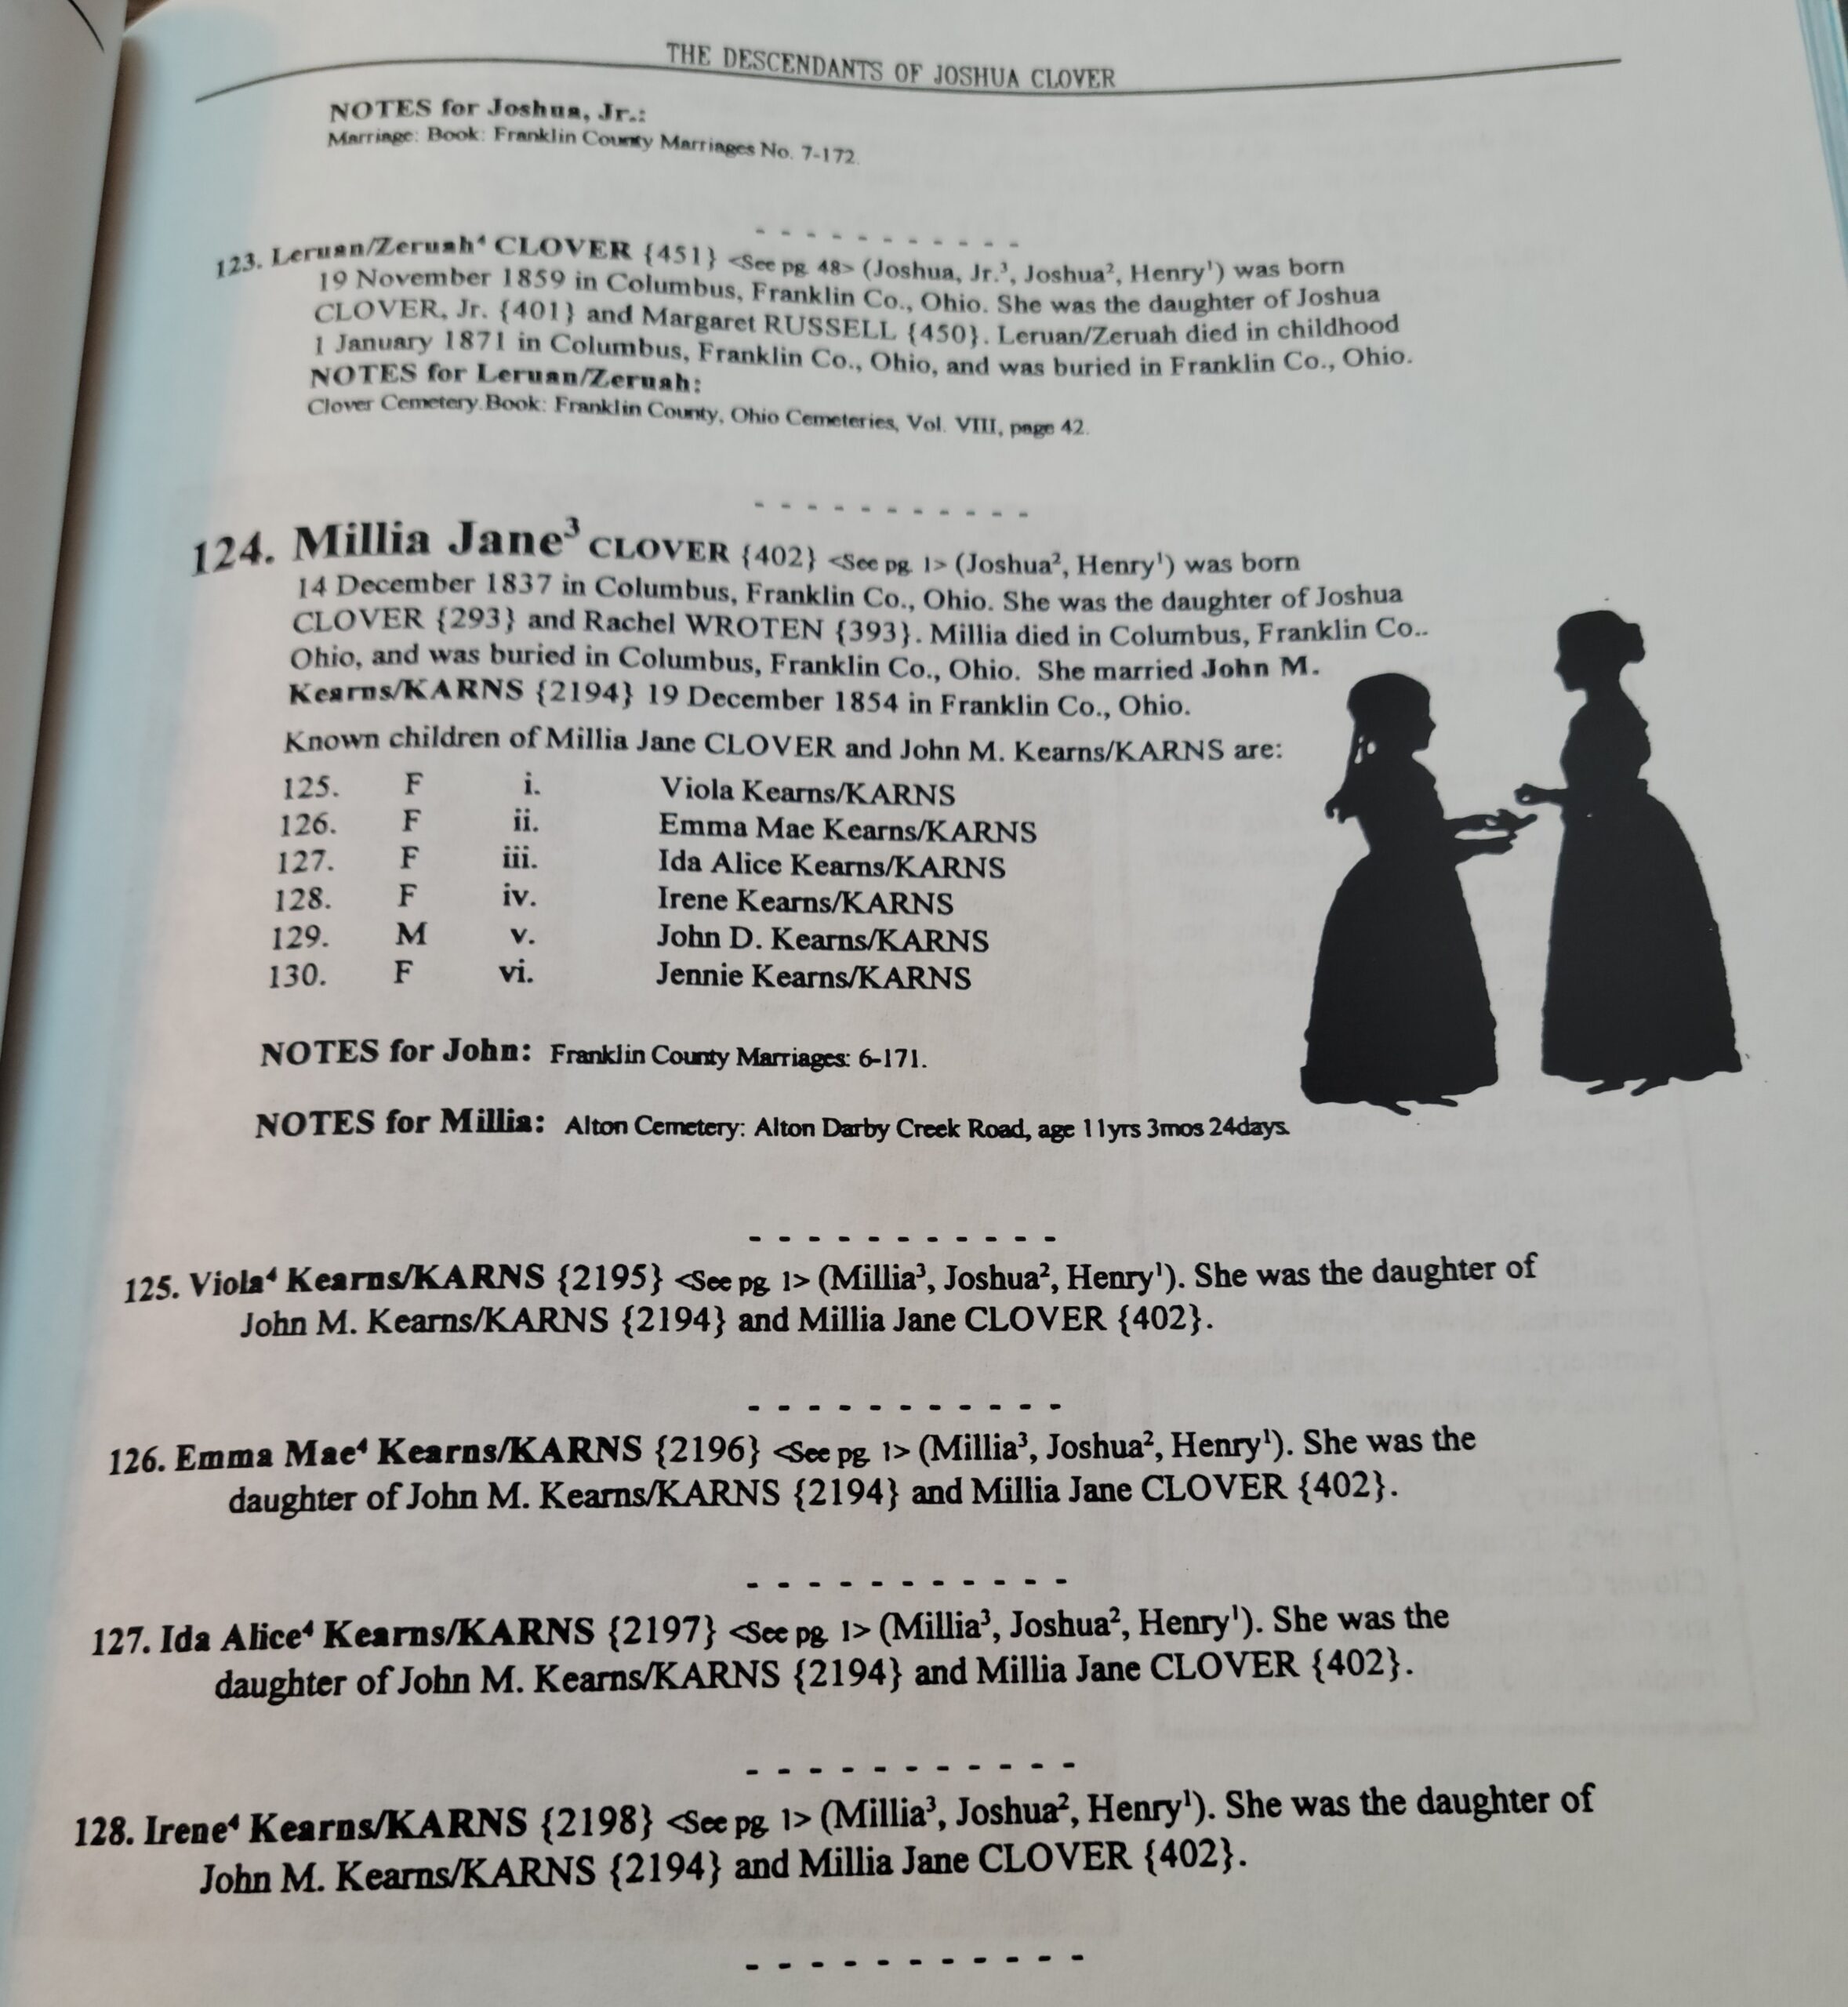 Details on Millia Jane Clover Kearnes and her children in The Clover Family of Franklin County, Ohio, Solomon/Orris Family History, Vol. 3 by Mrs. Judy (Orris) Soloman © 1997